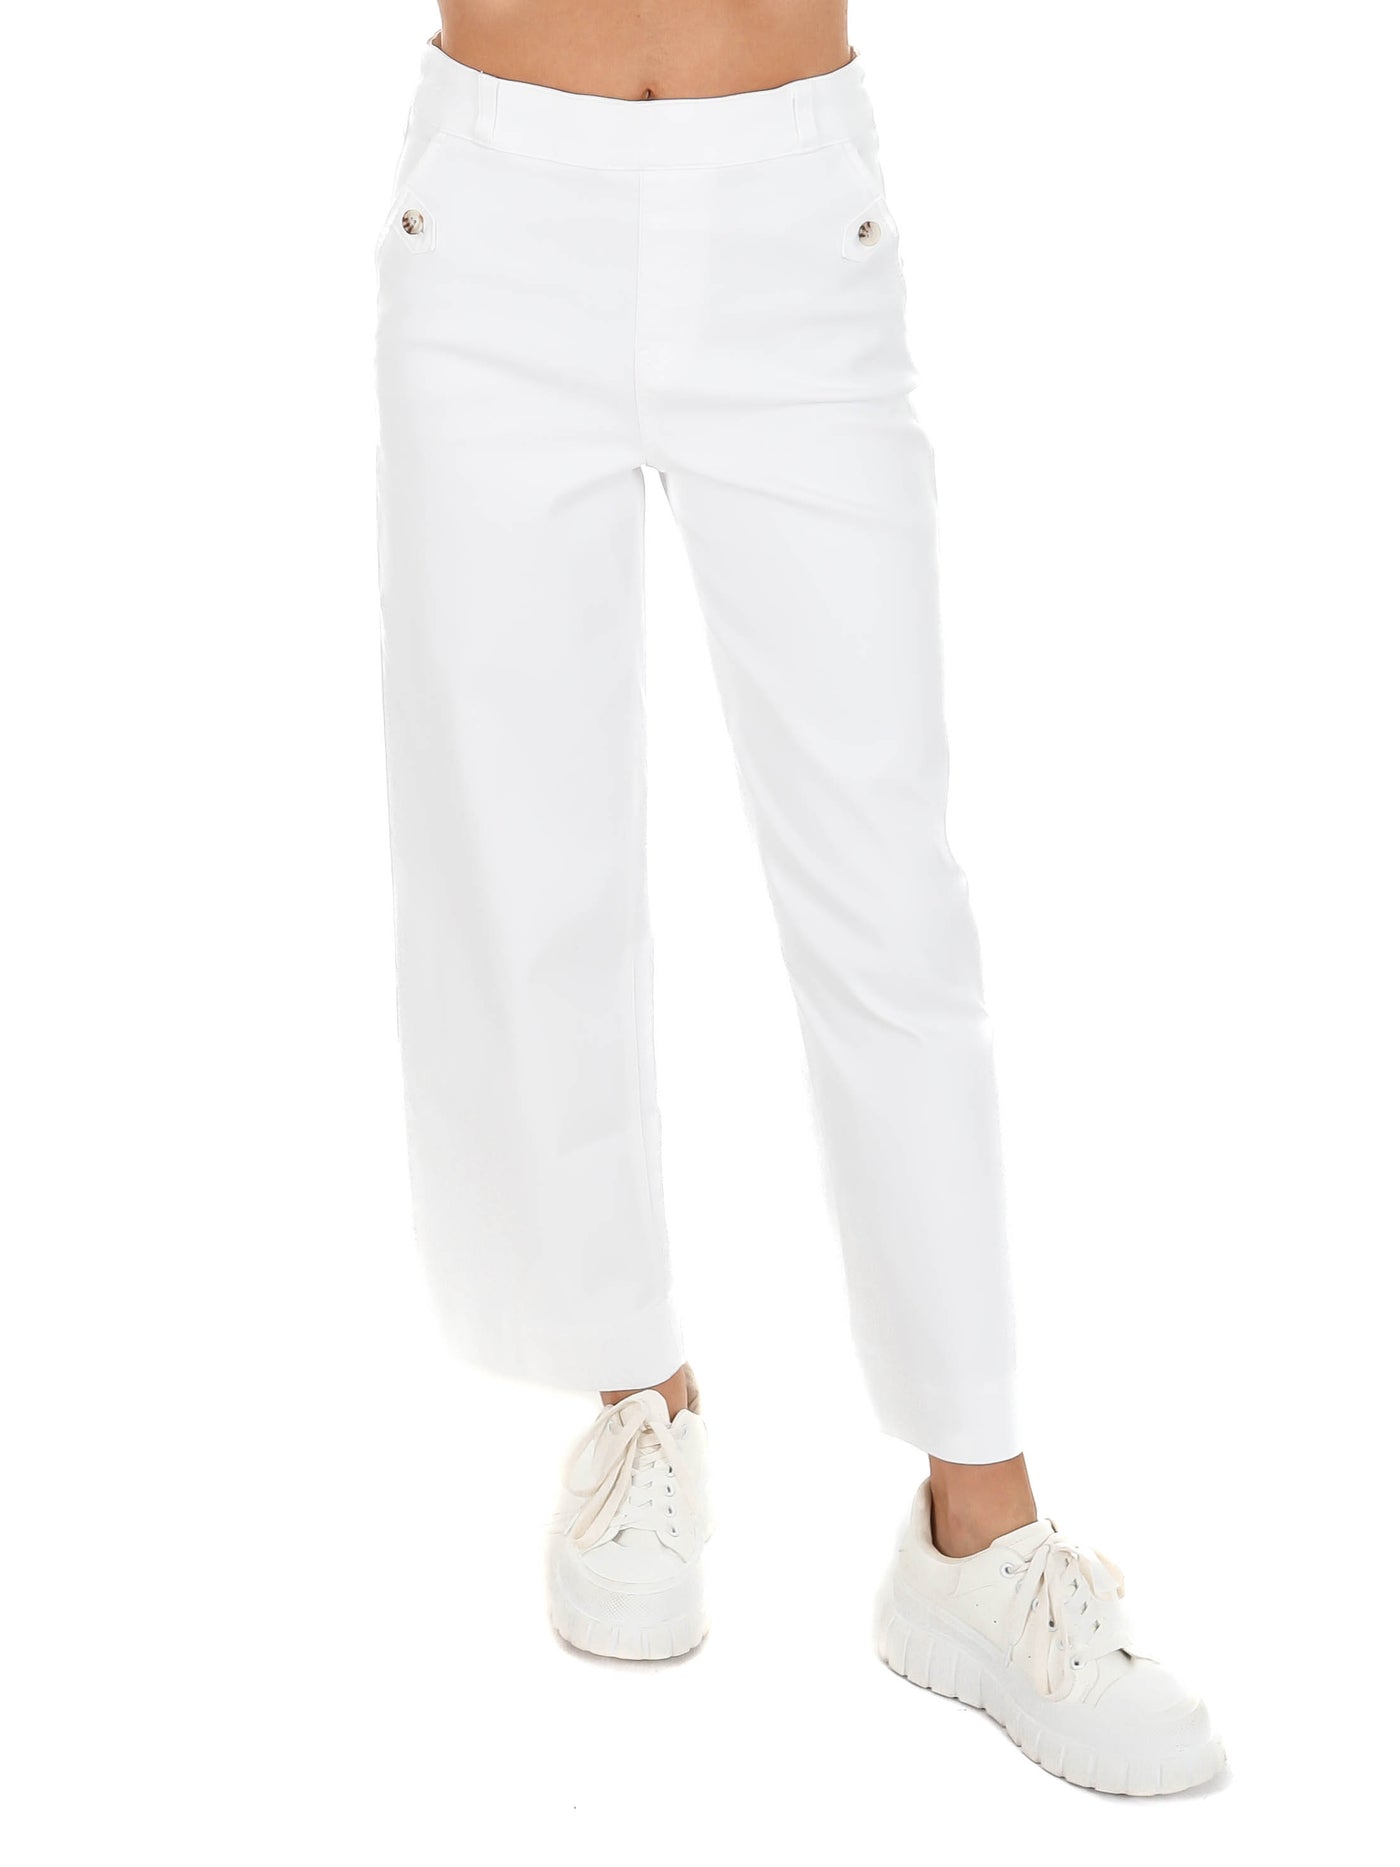 Stretch Twill Cropped Wide Leg Pant, trousers